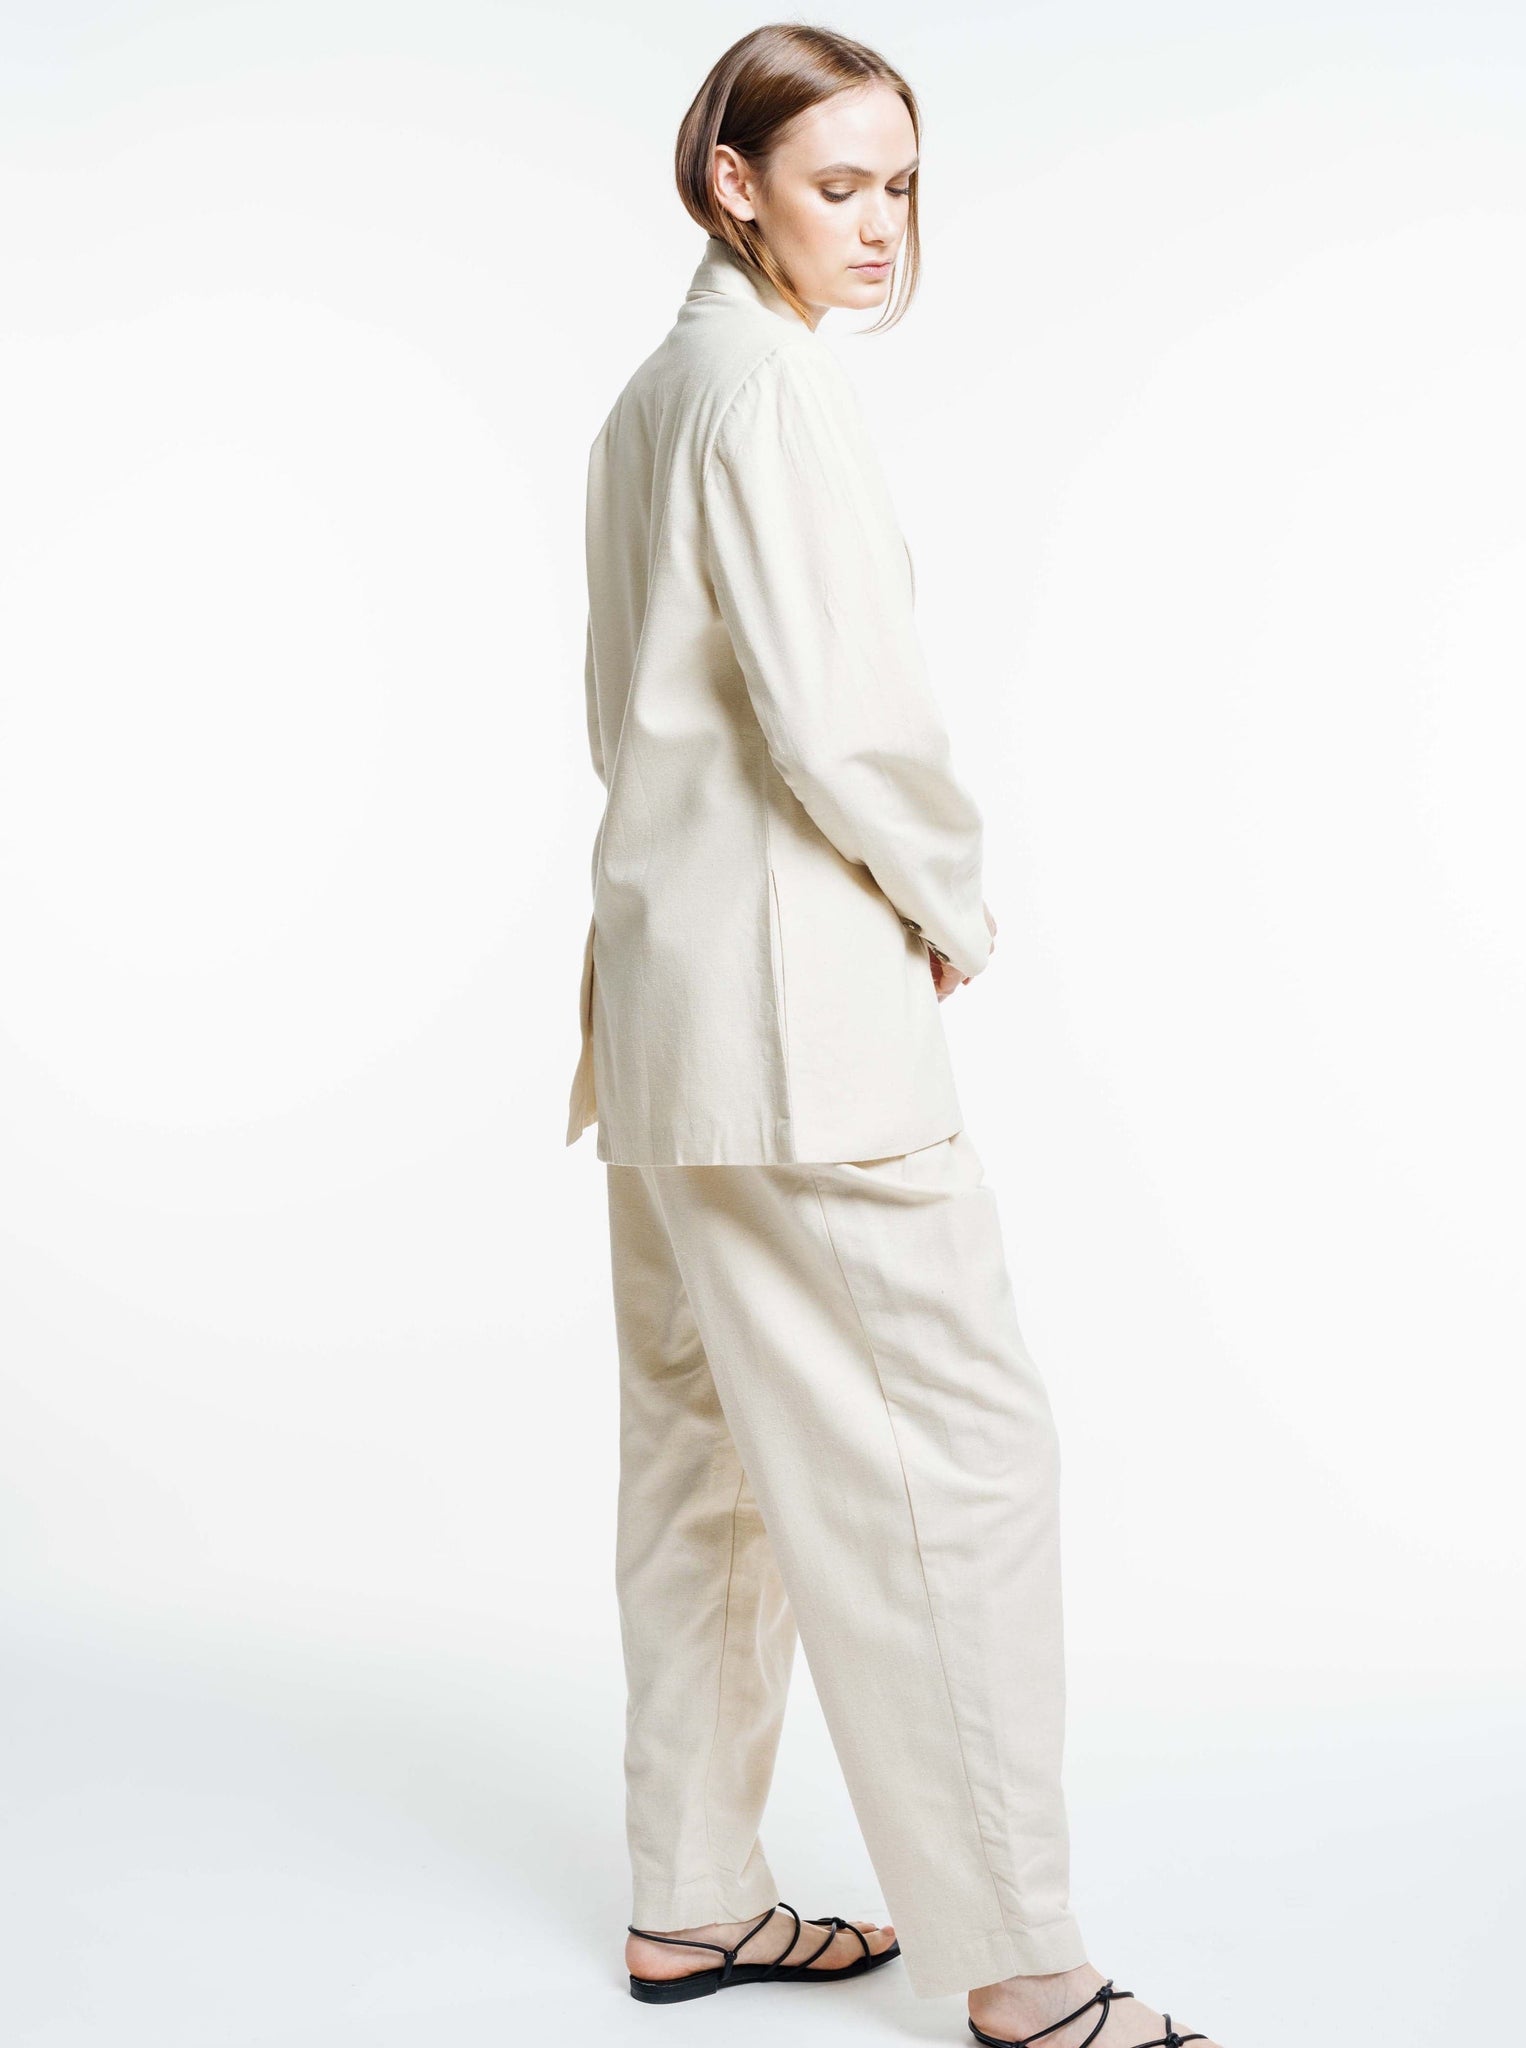 A woman in a white Bea Blazer - Ecru Silk Noil - Sample and sandals, inspired by menswear.